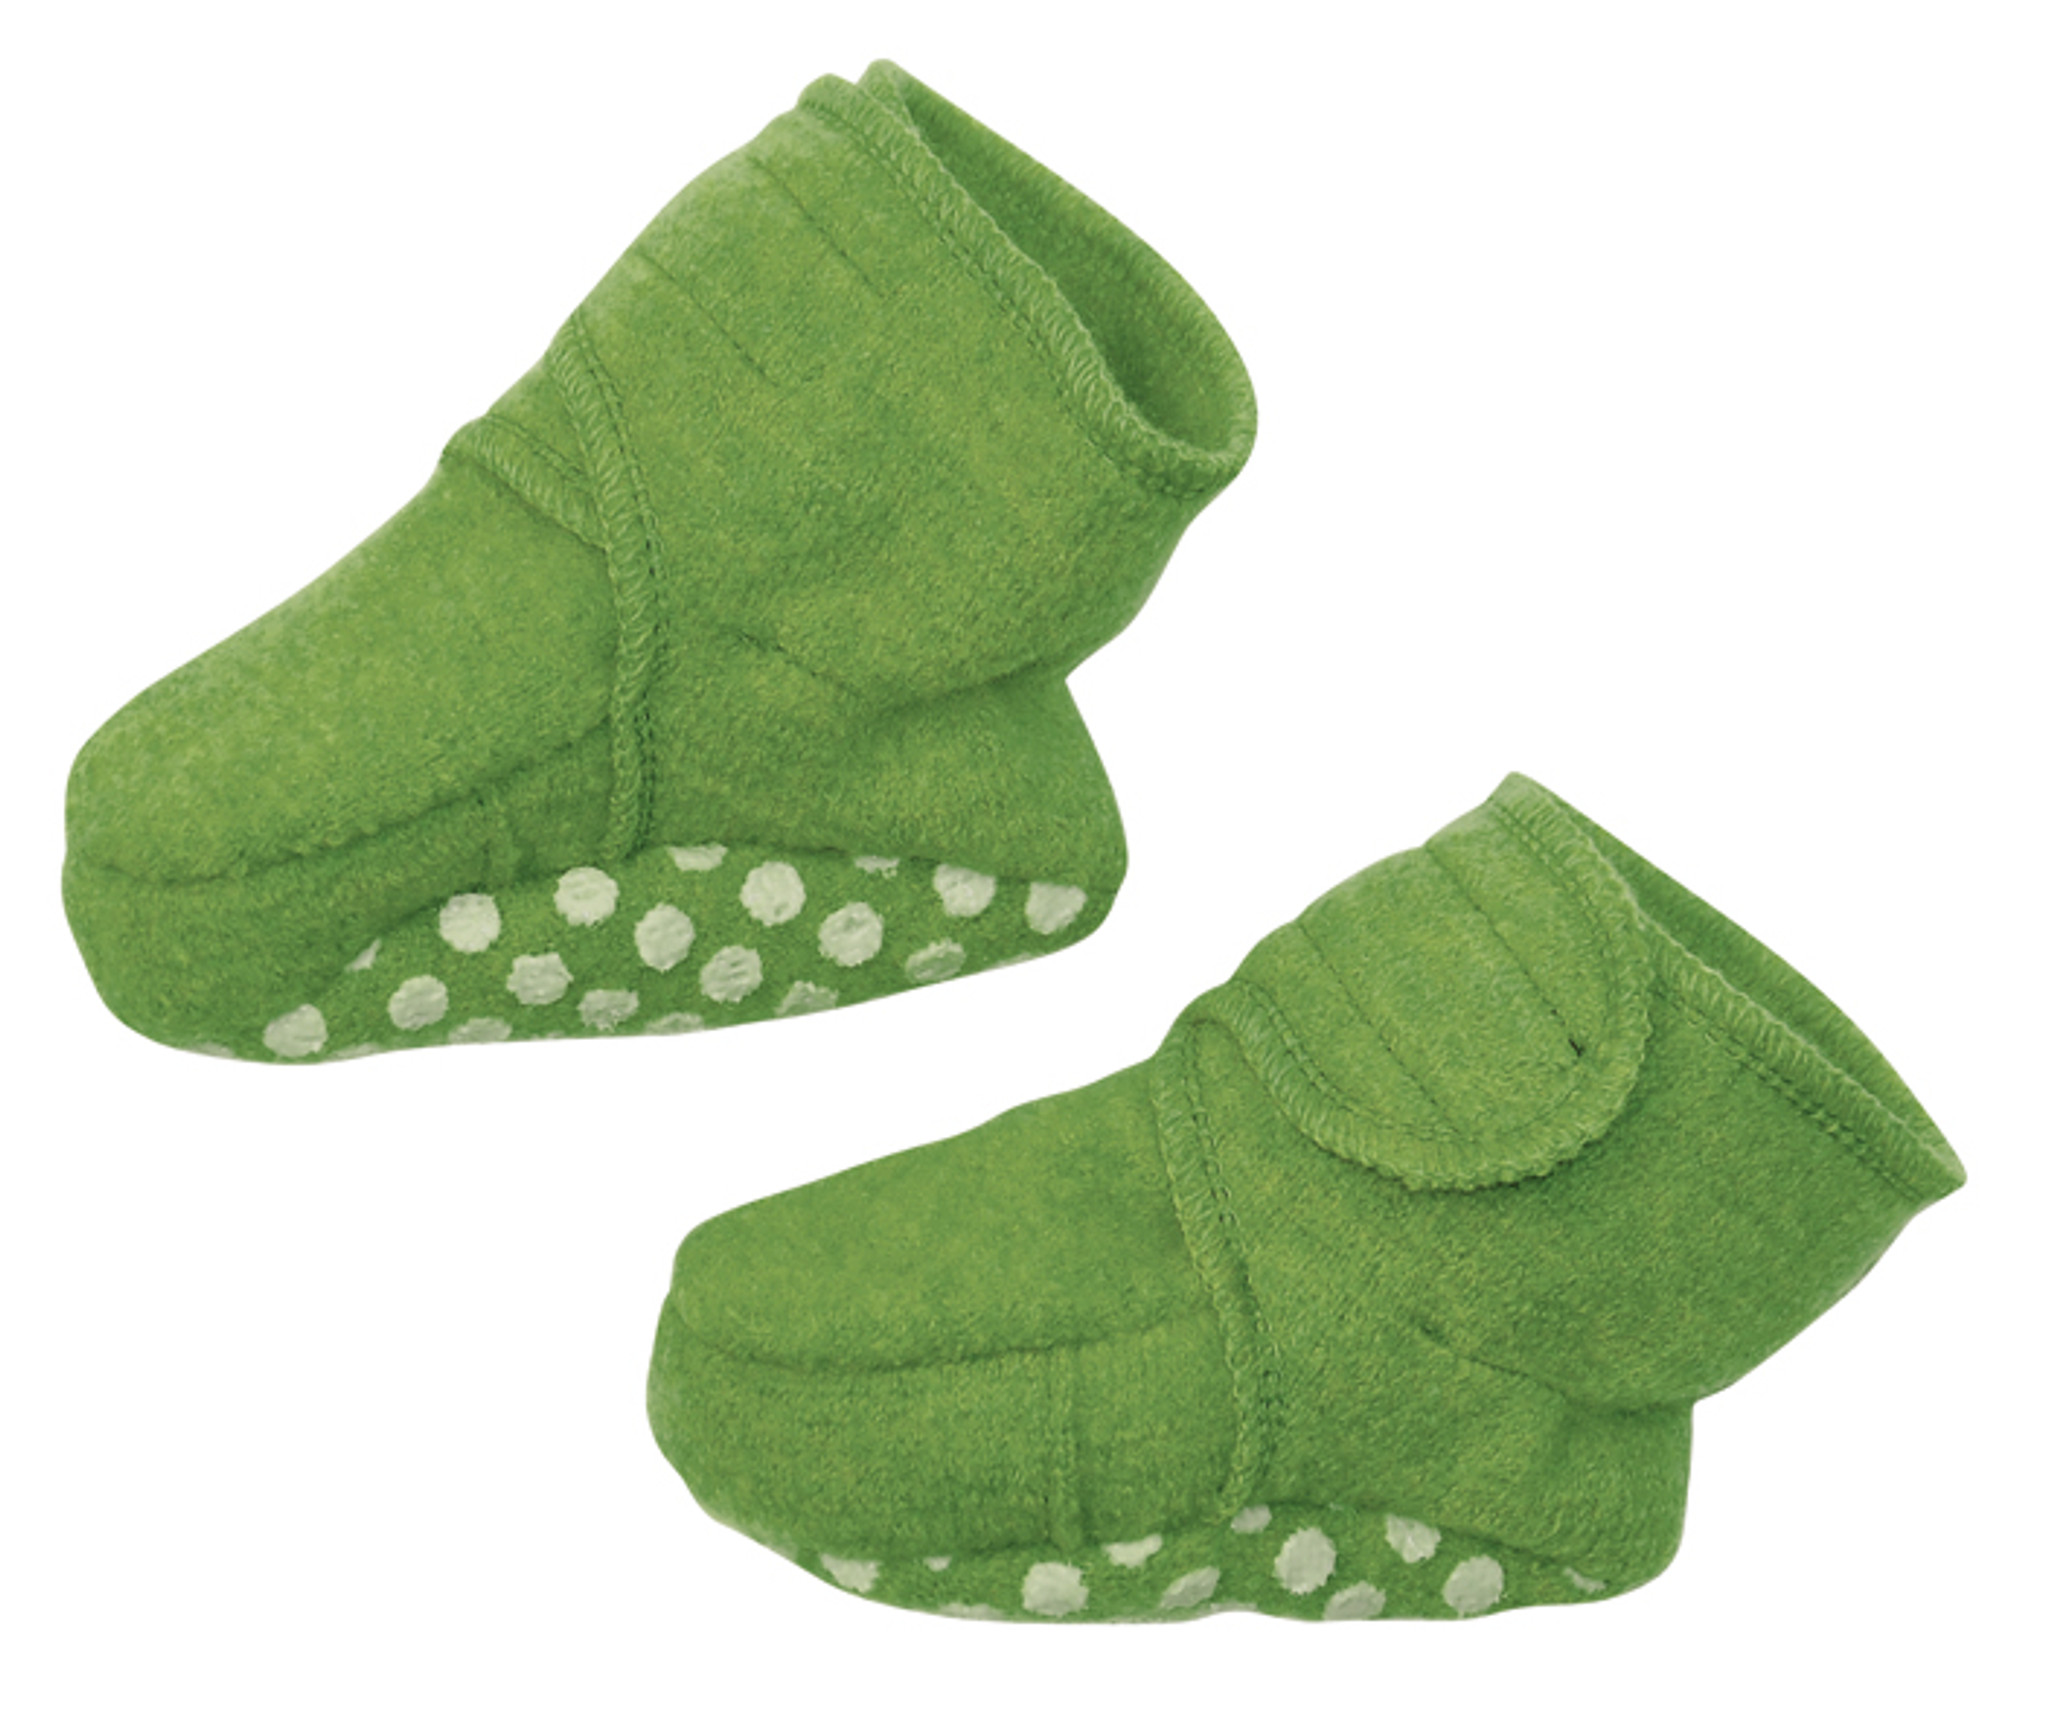 baby boiled wool slippers